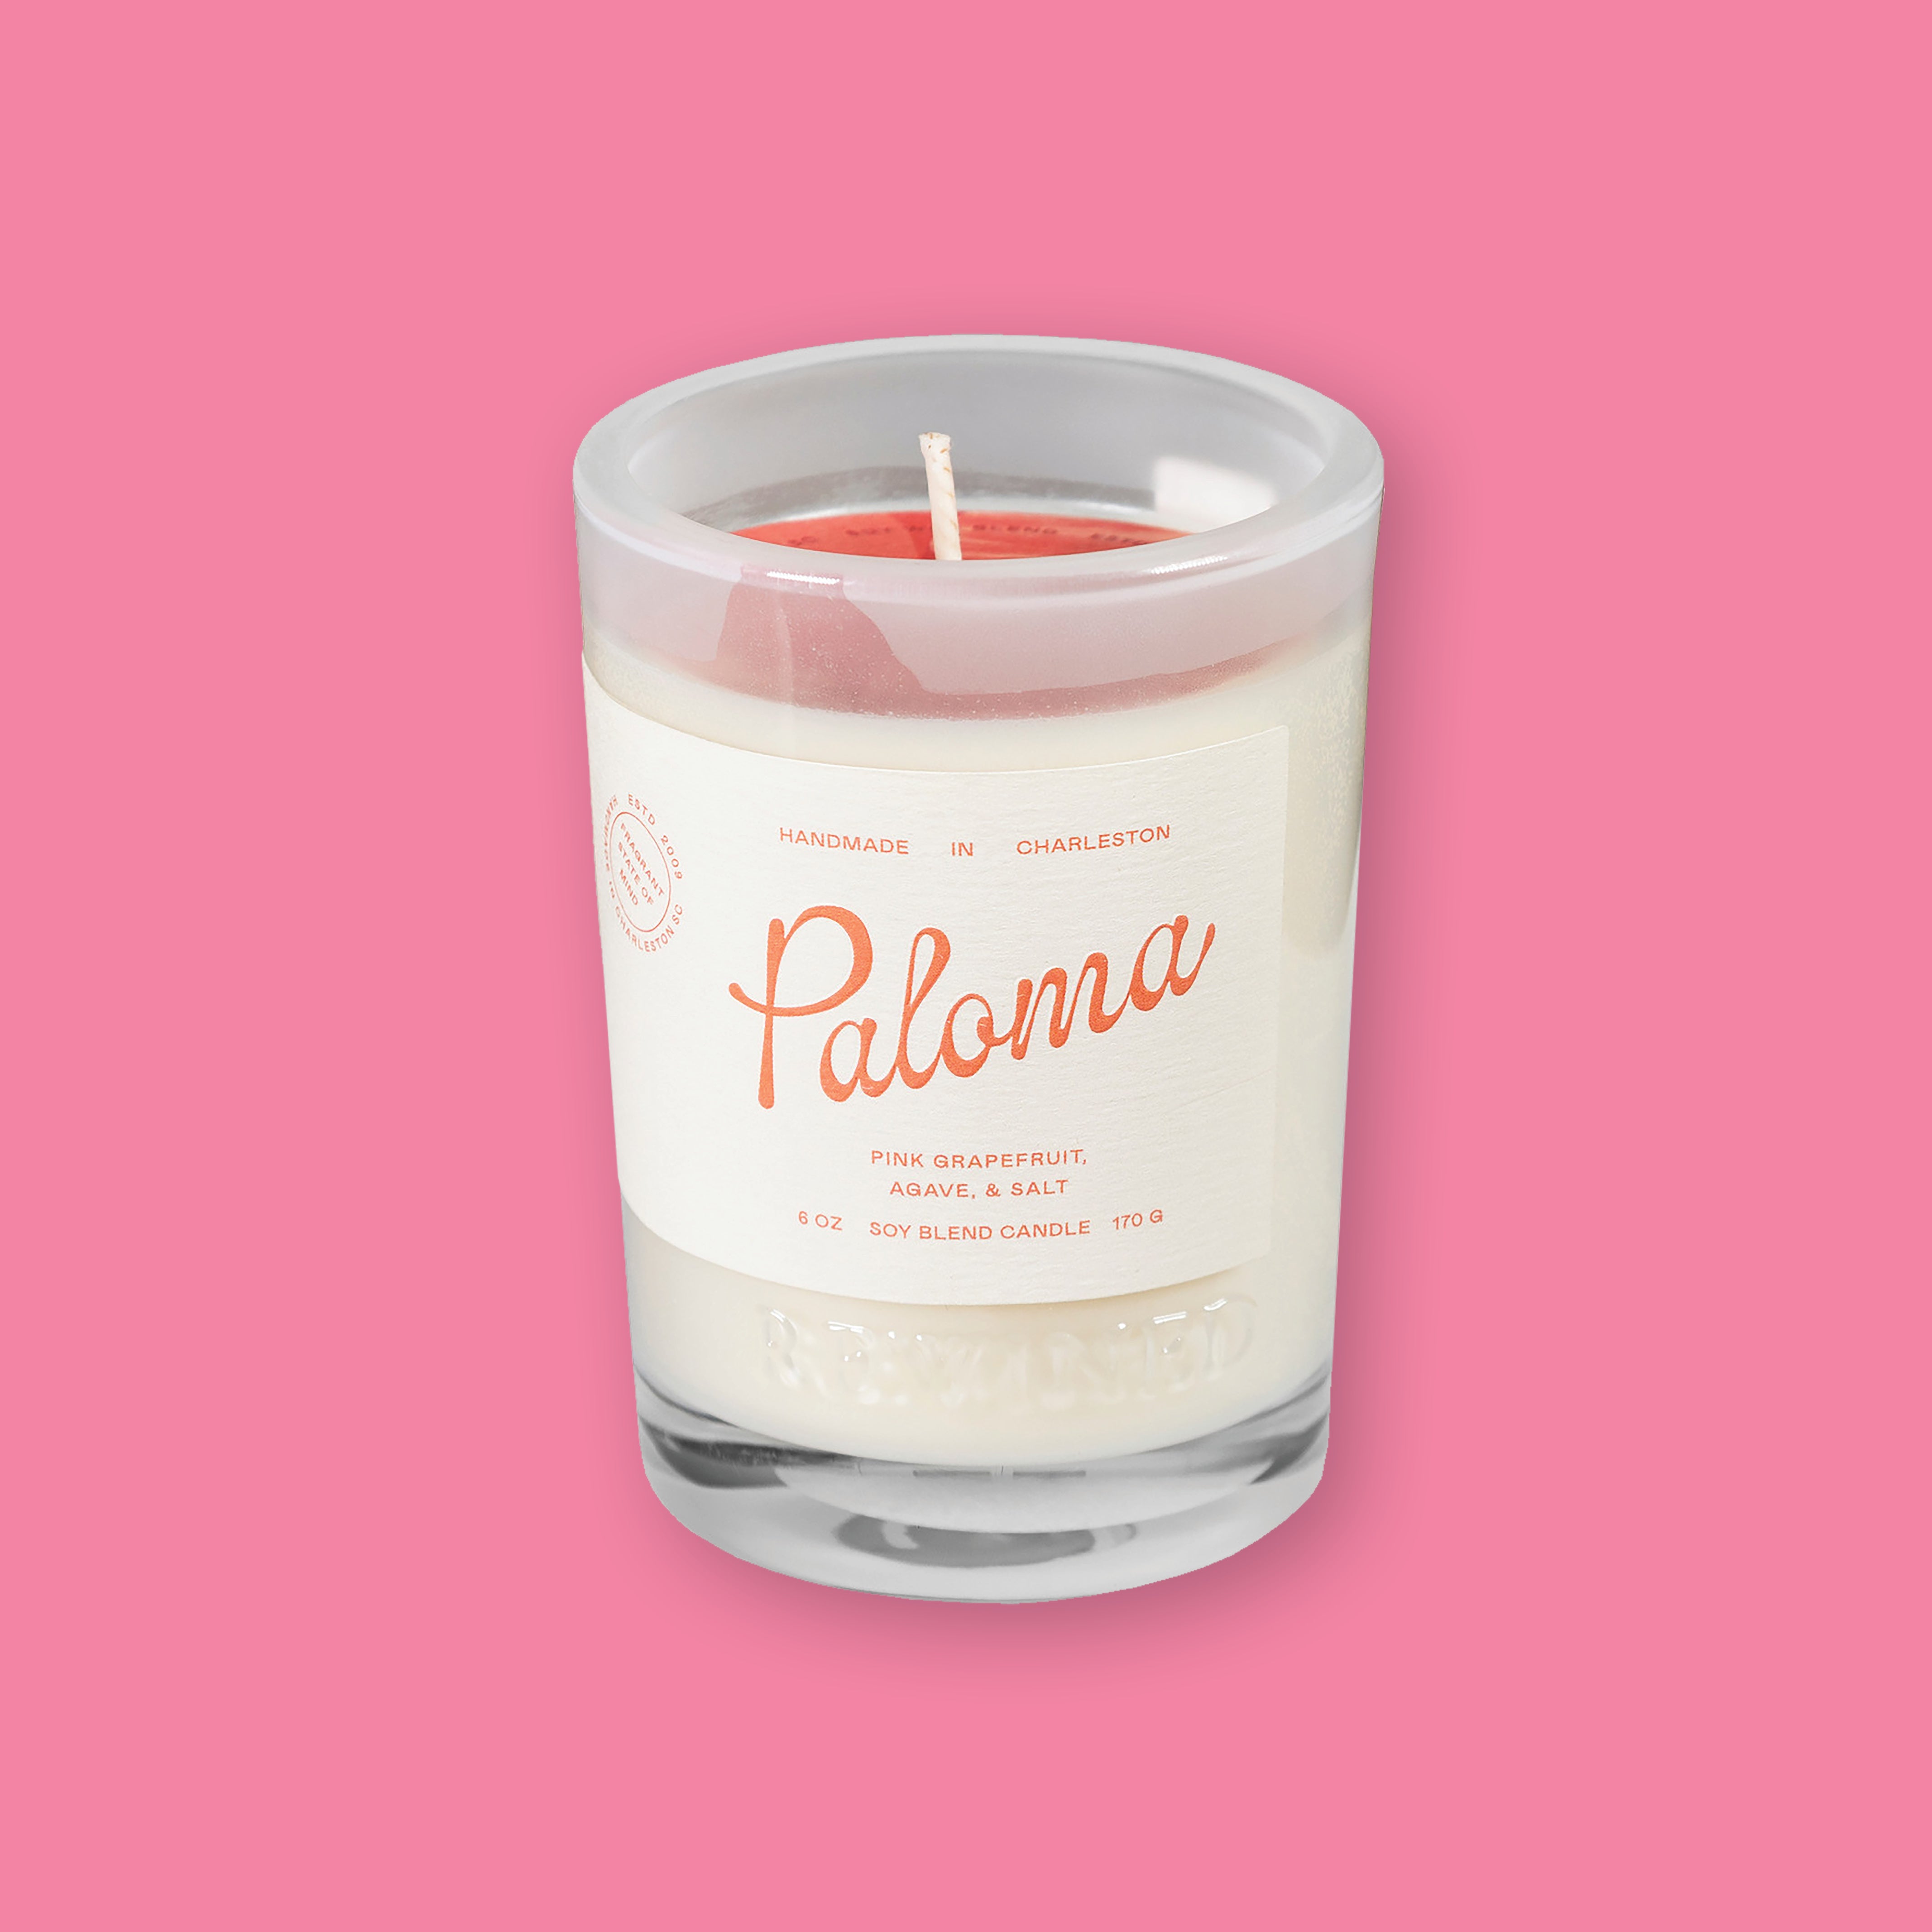 Paloma Cocktail Candle